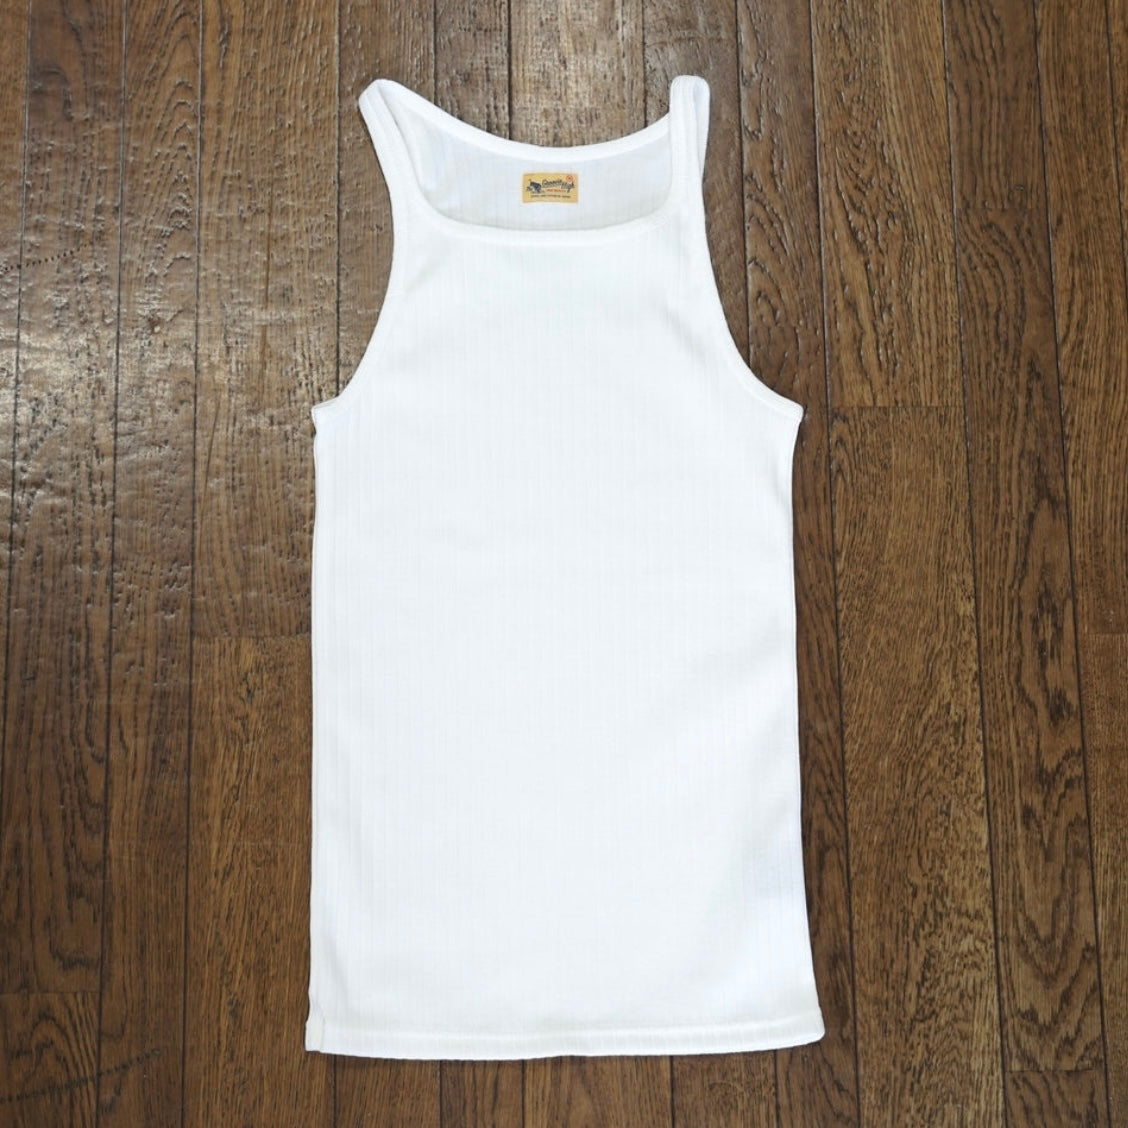 The Groovin High - 240209 Tank Top